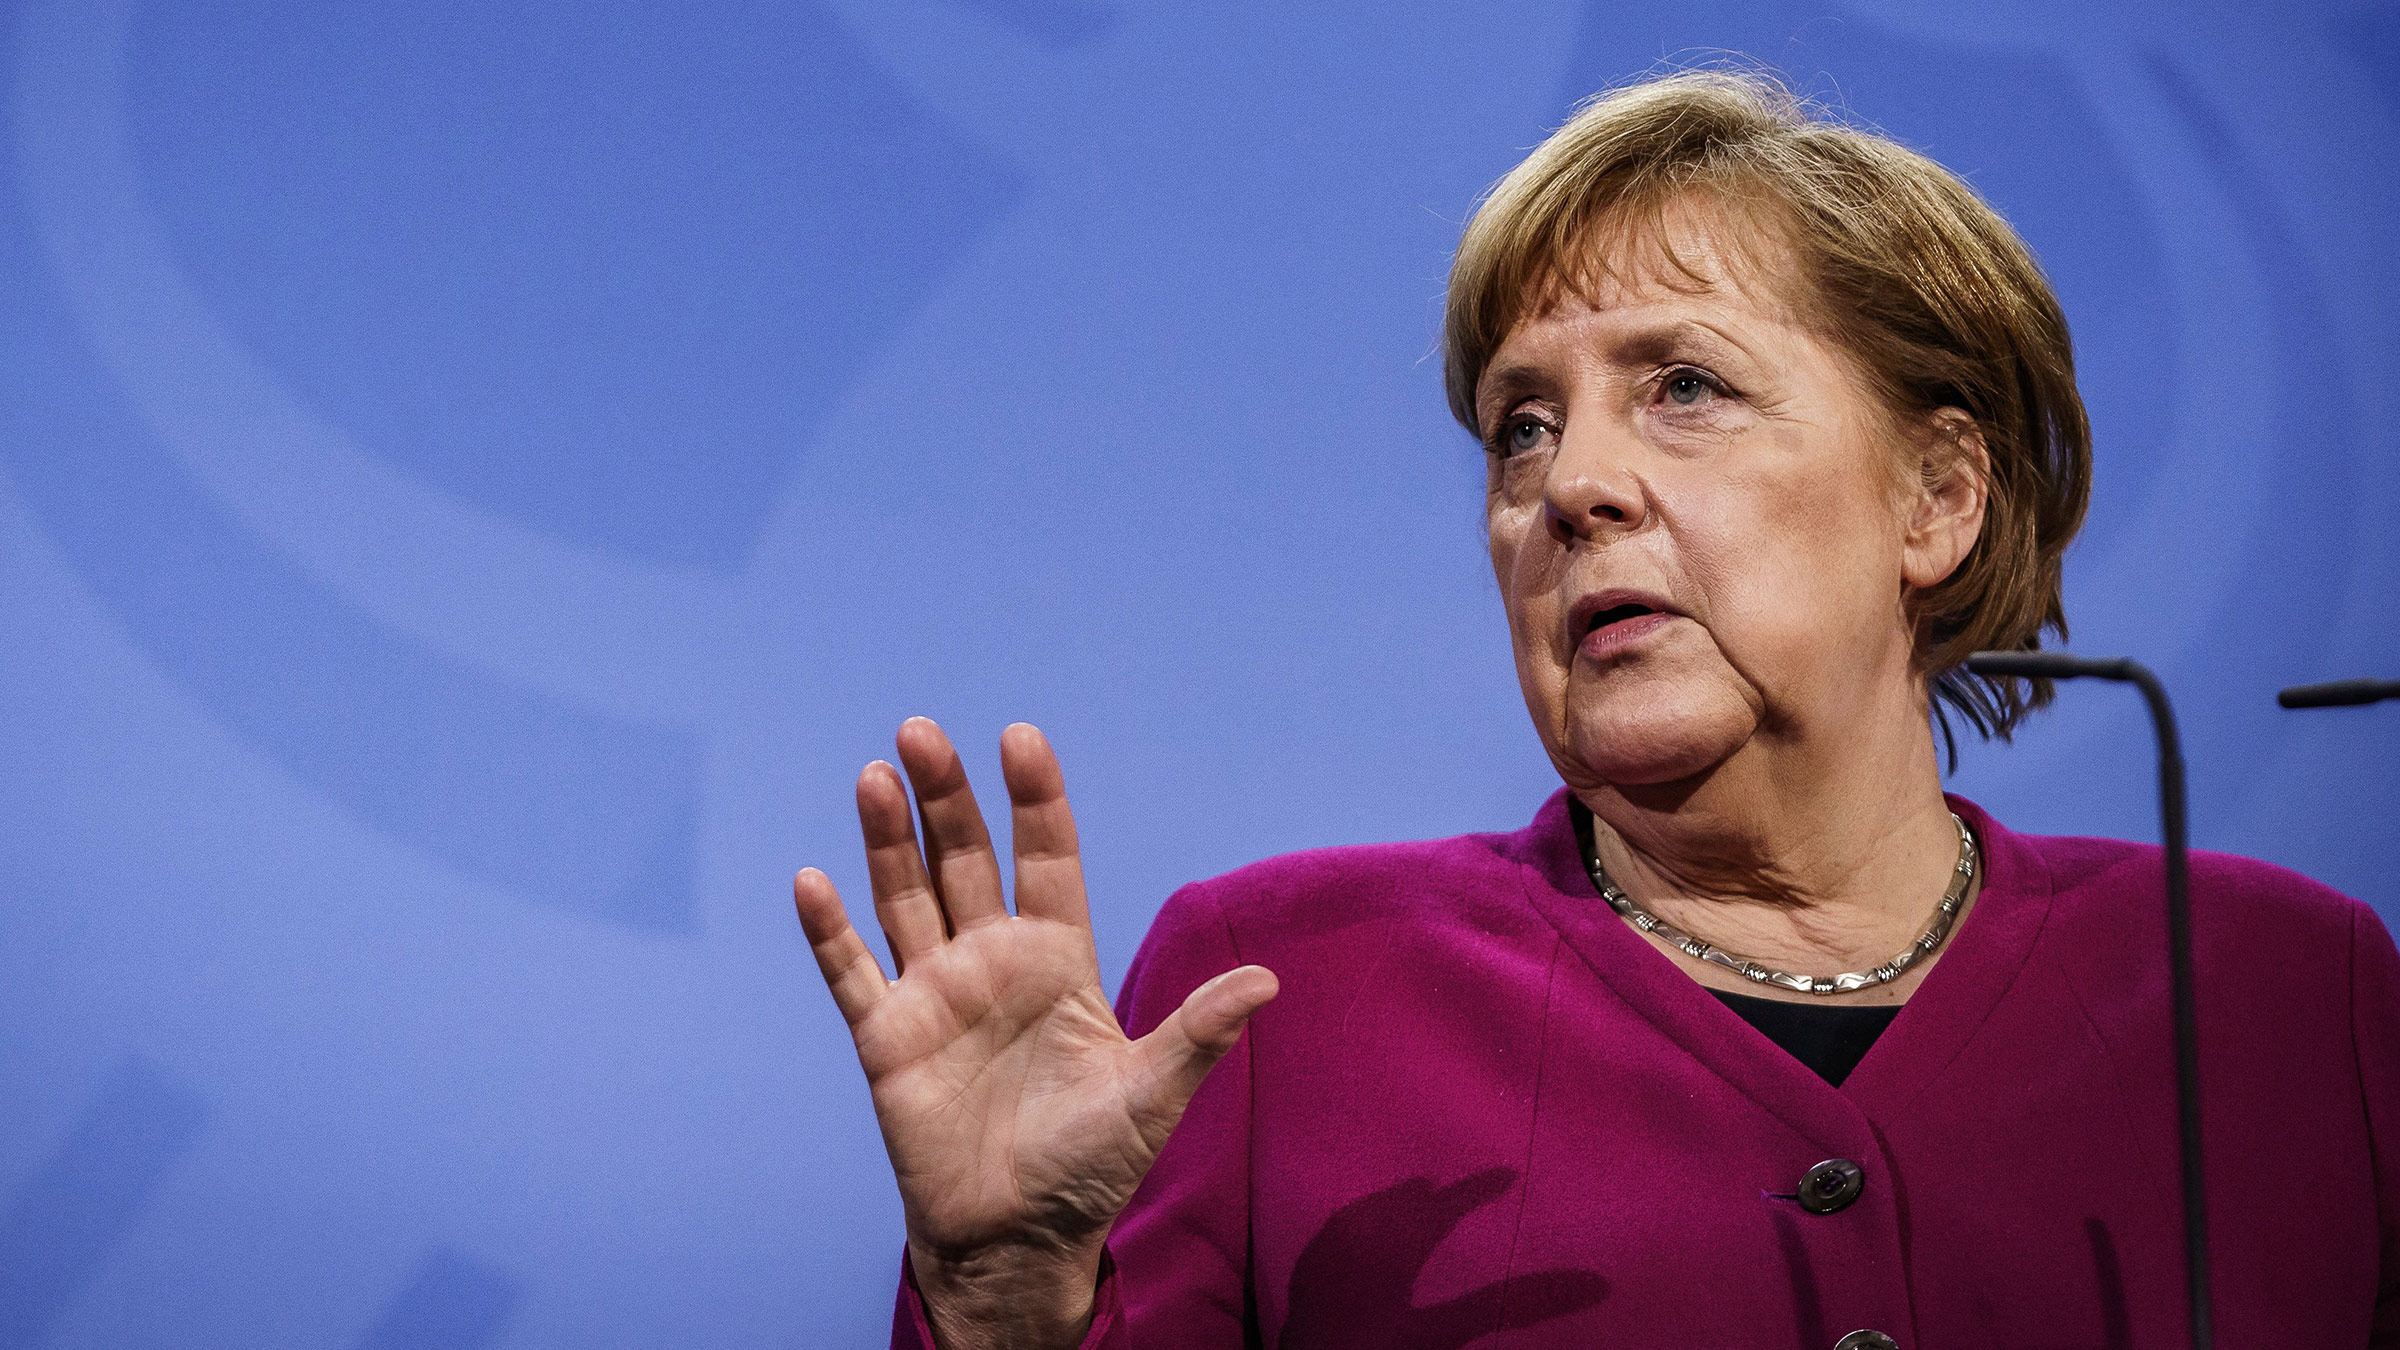 German leader Angela Merkel gives a press statement at the Chancellery in Berlin, on March 25.